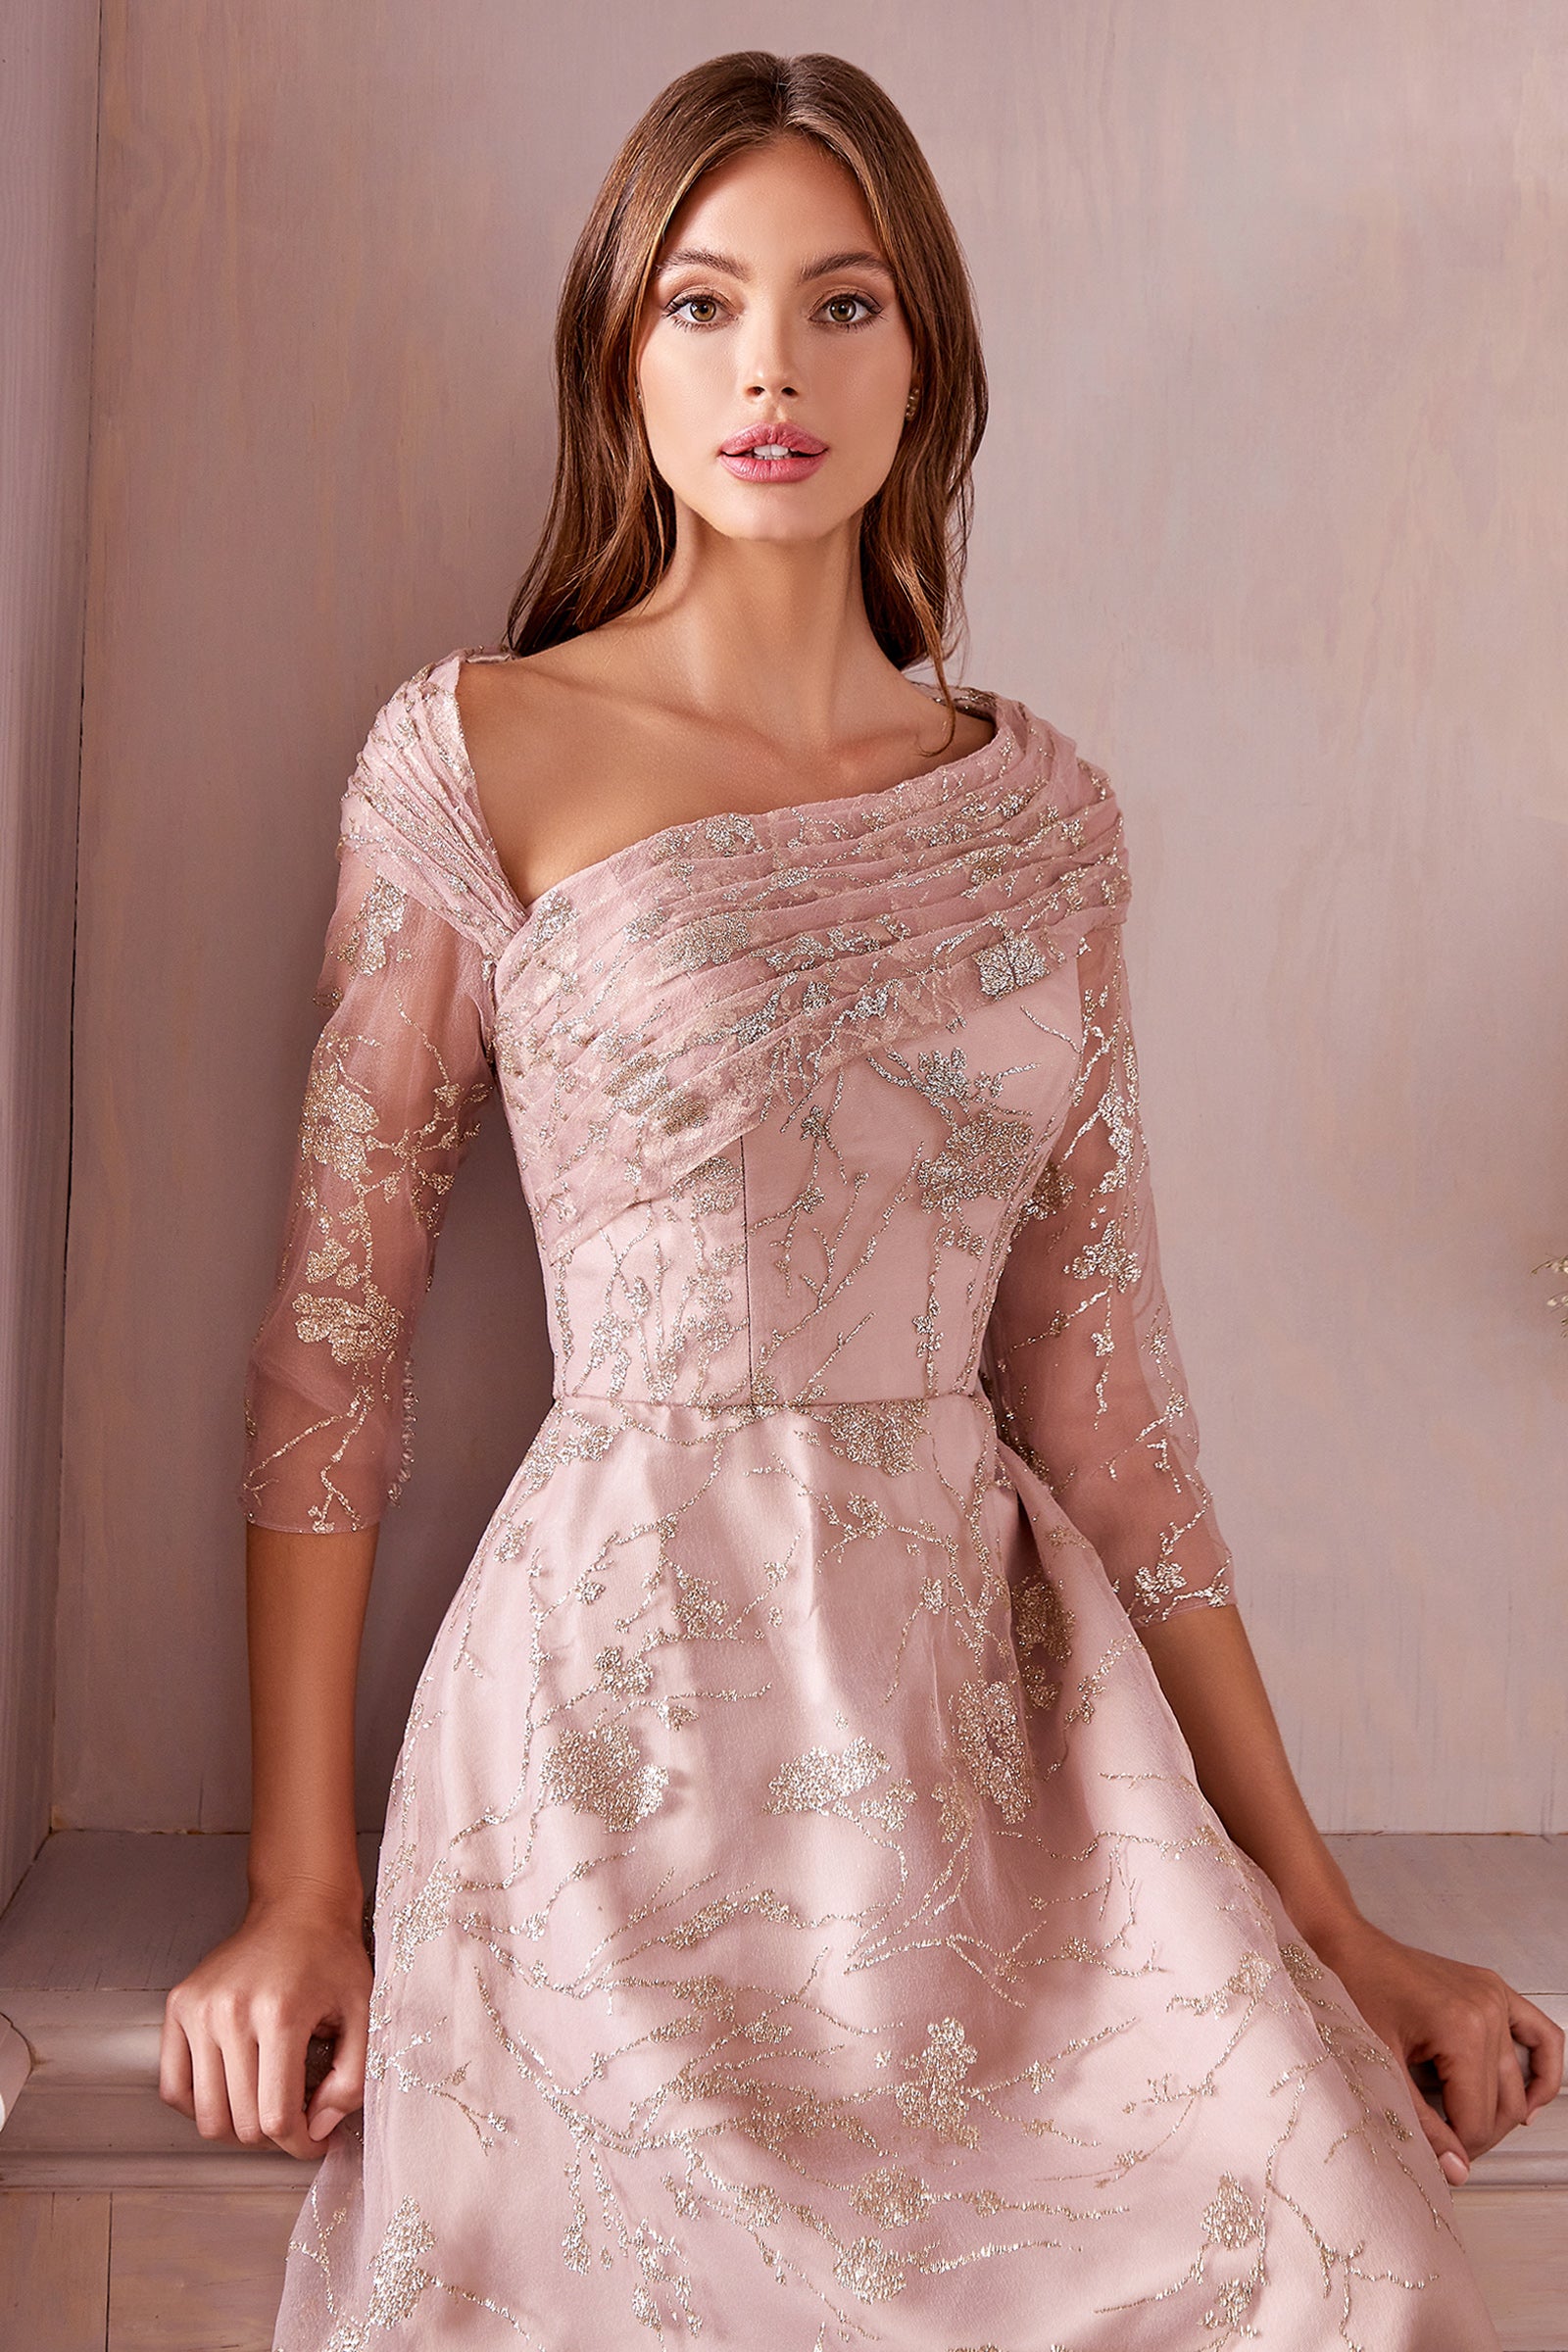 Sage and soft rose tones are trending for 2022. Golden Foliage Gown is the perfect Mother of the Bride/Groom dress that features gold metallic floral print on soft, muted pastel organza. This elegant A-line silhouette is soft and effortless. Three-quarter